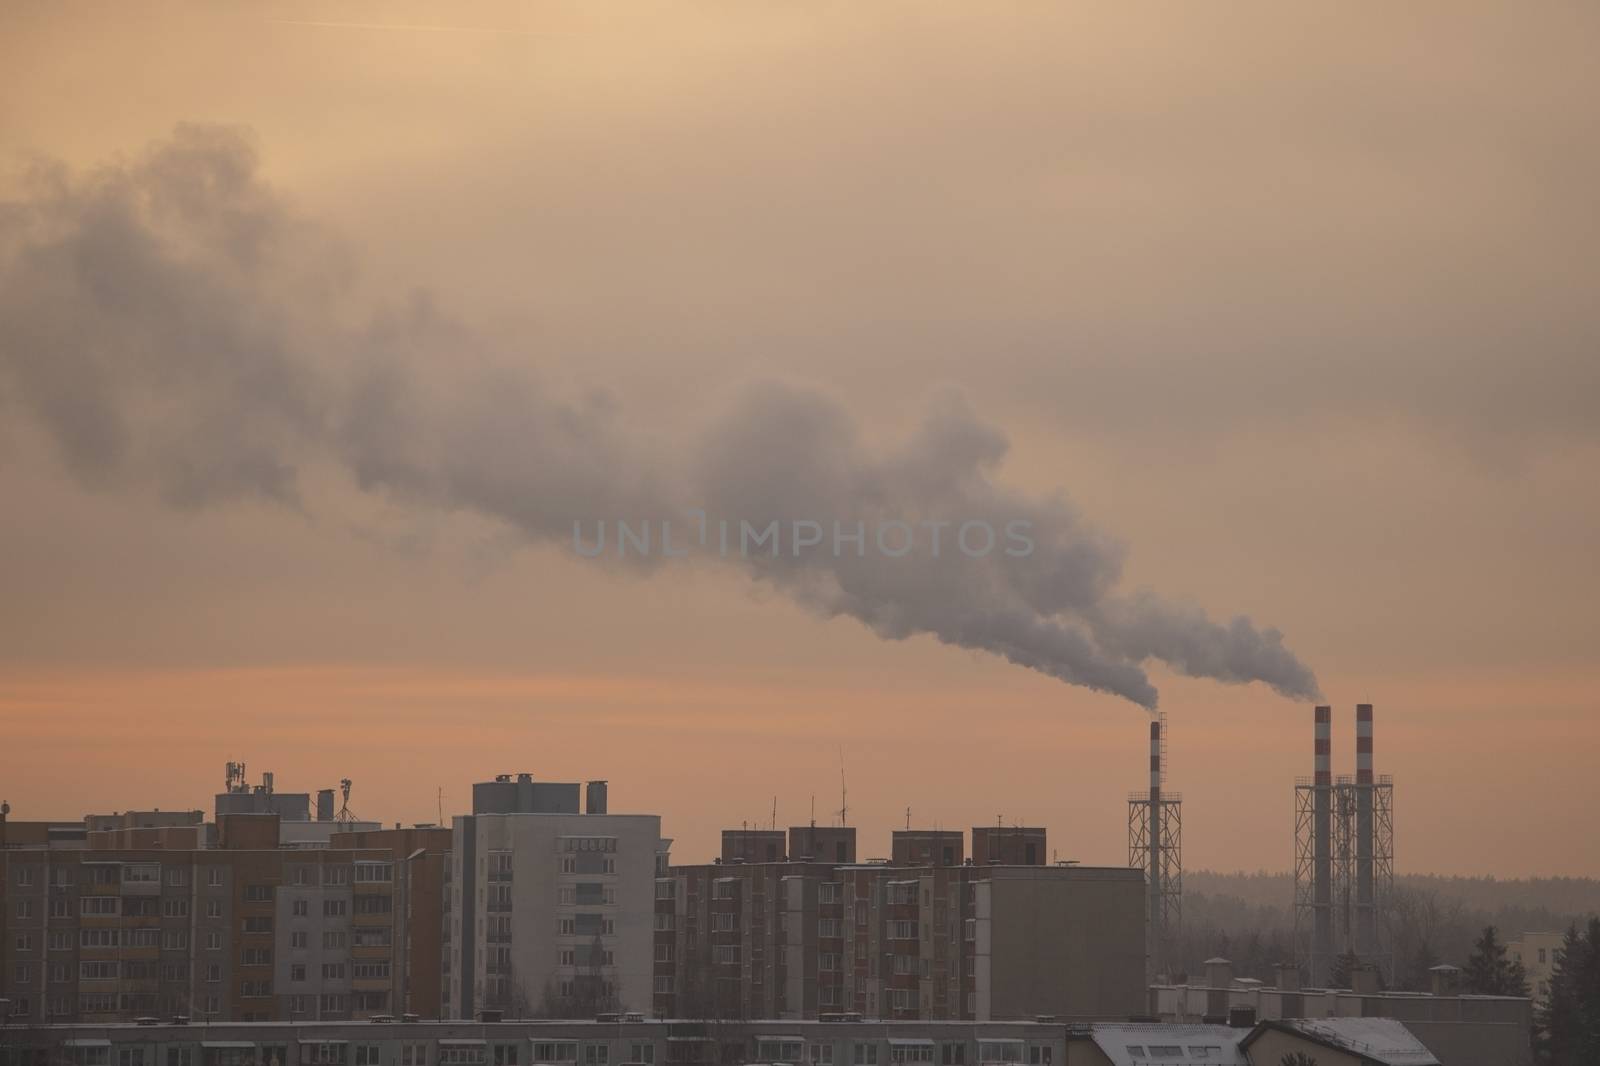 Smoking pipes from heating plants that supply heat to the city and the sky in the winter morning. by kip02kas